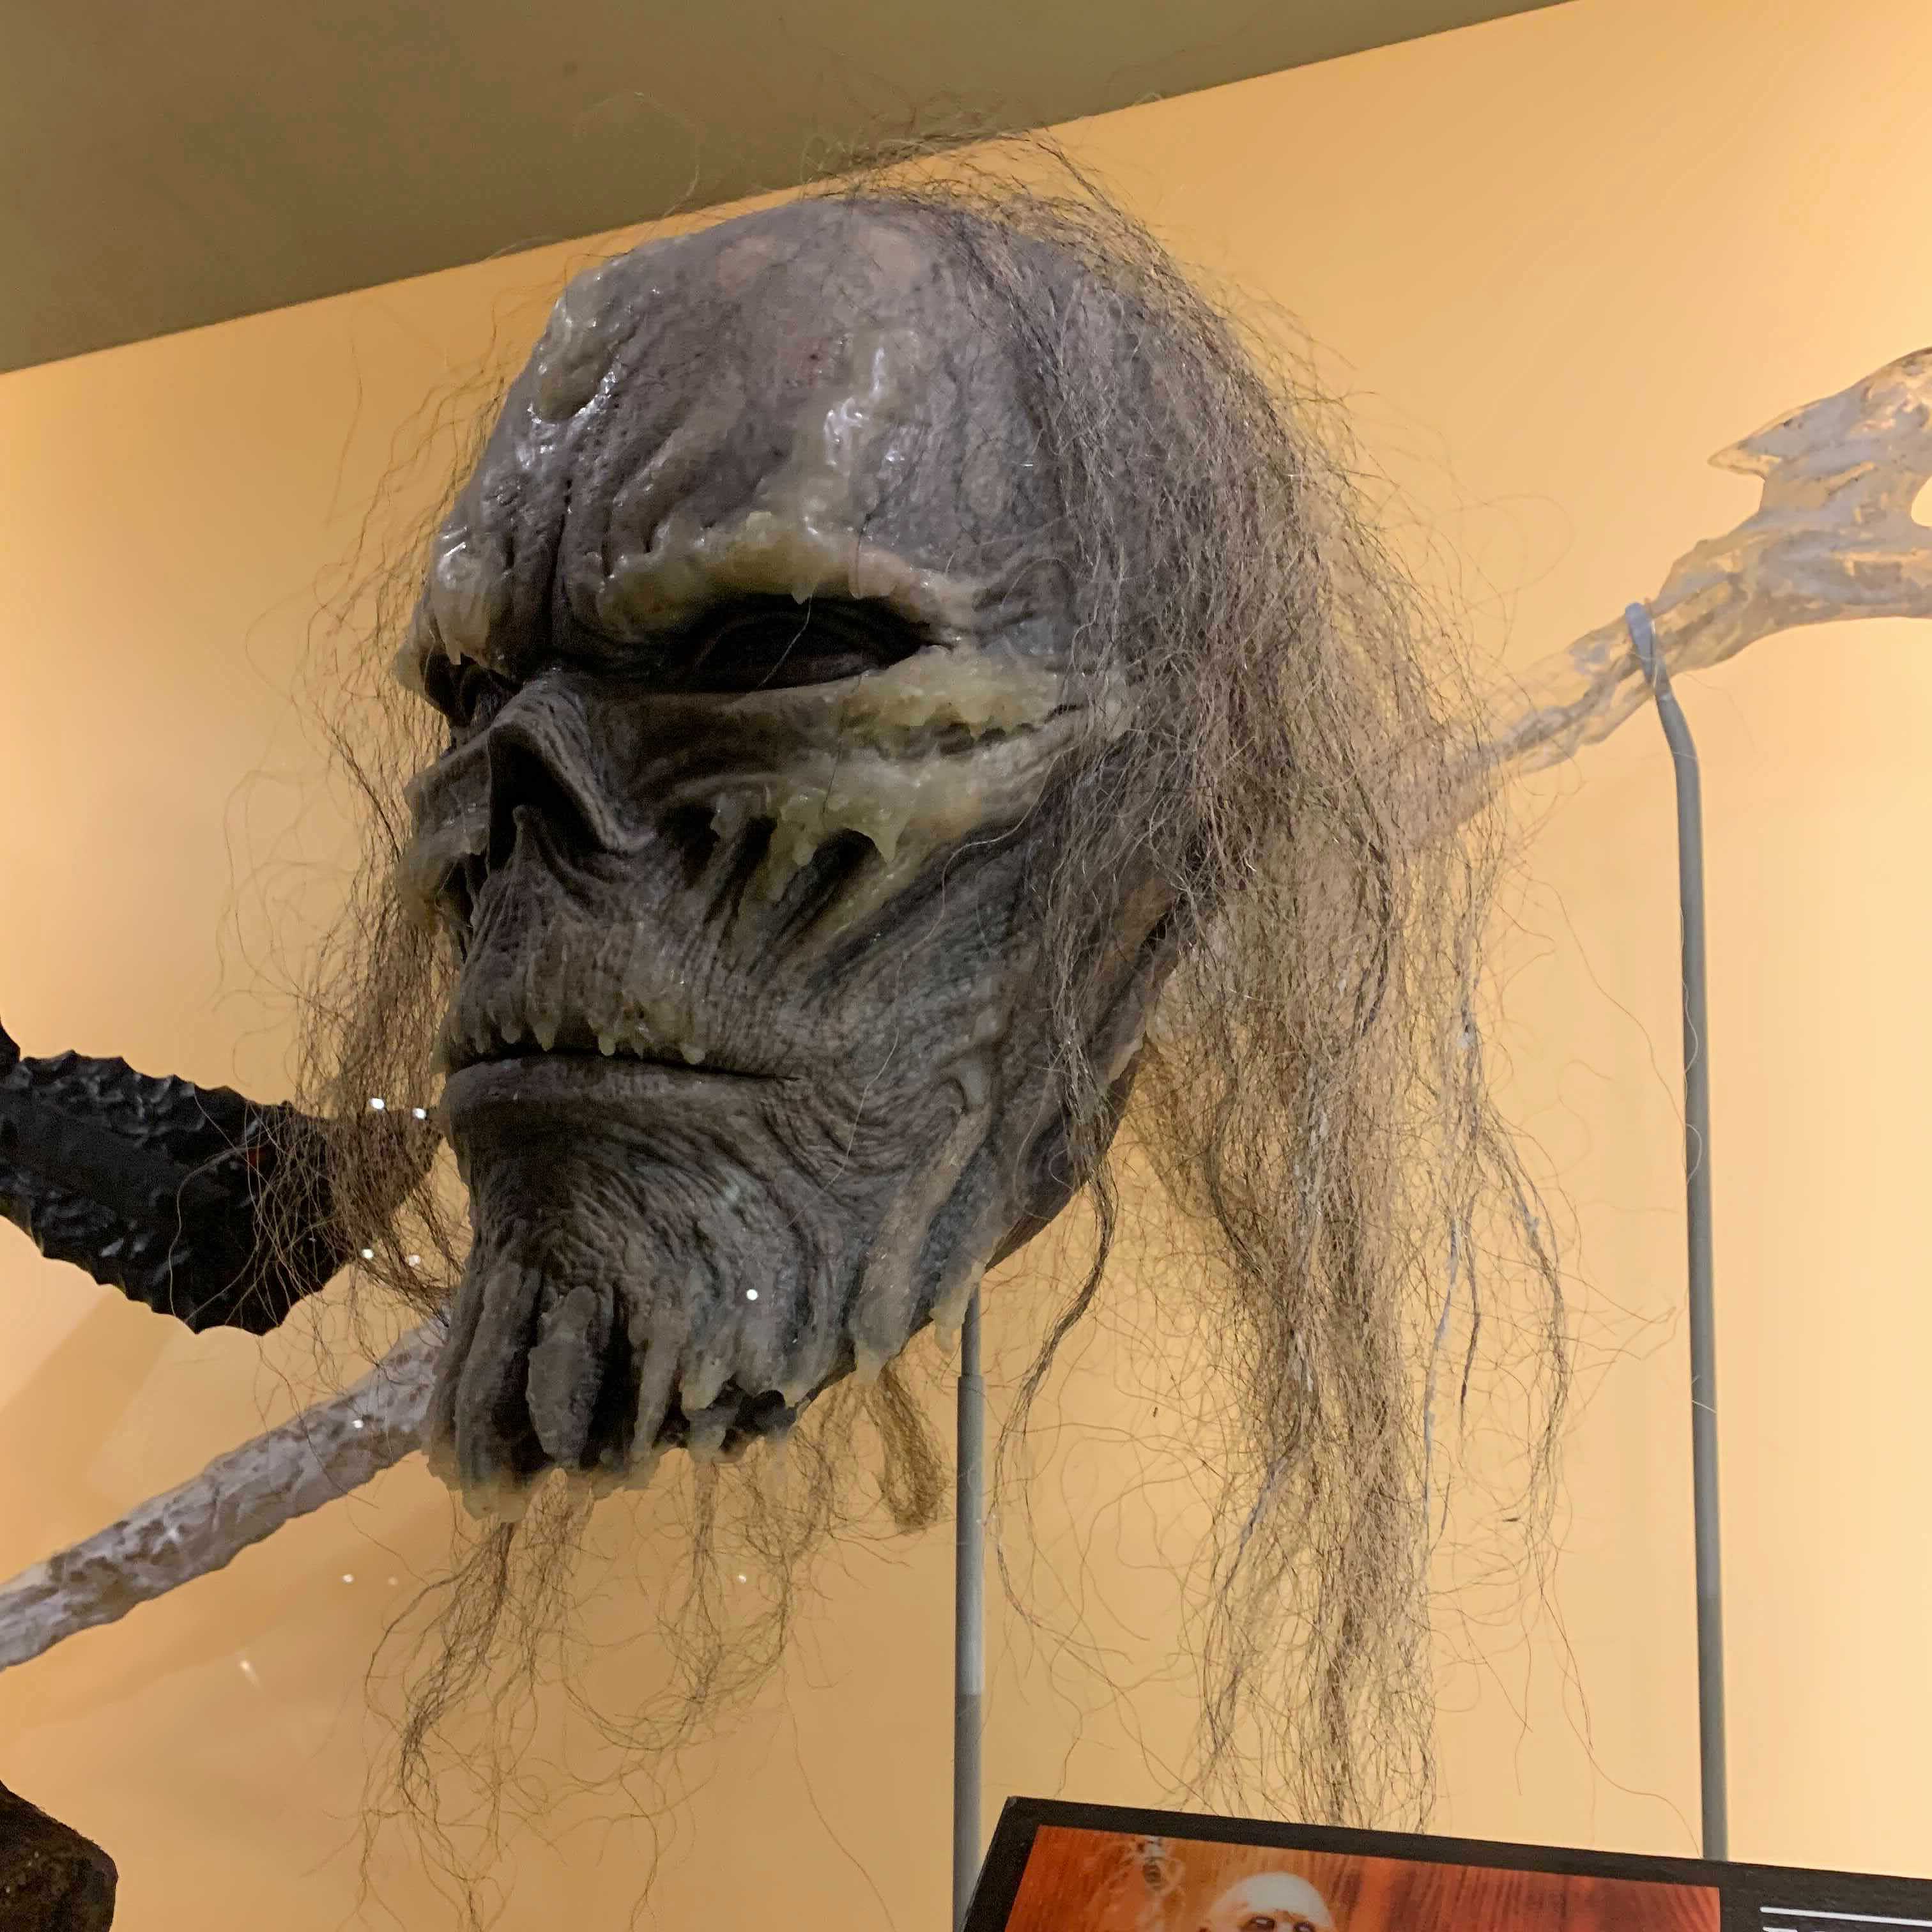 White Walker mask from Game of Thrones episode "Winter is Coming" (2011)